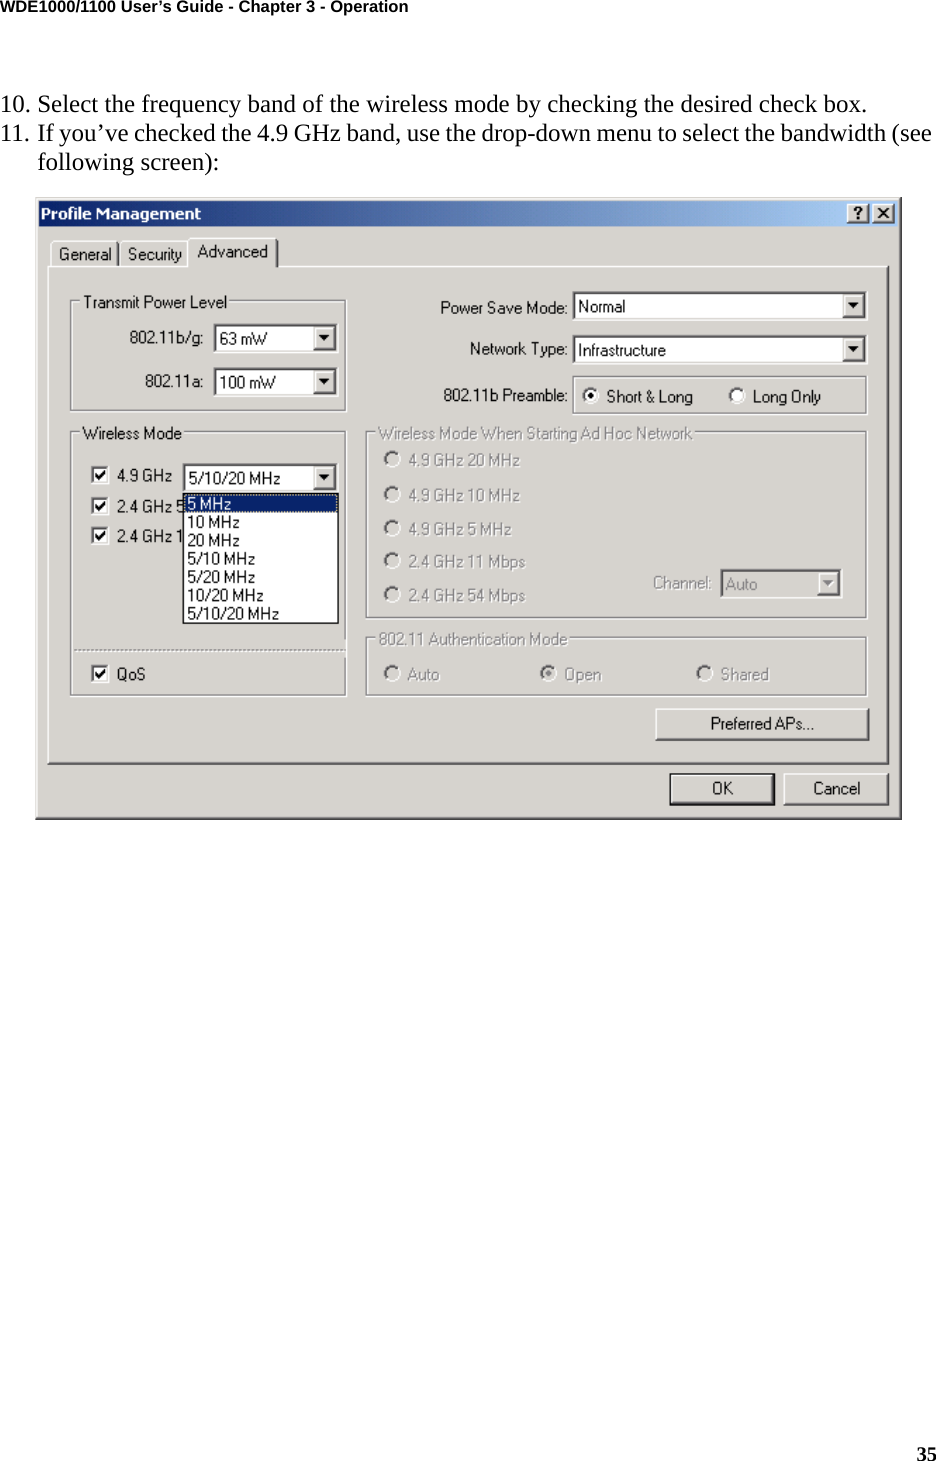 35WDE1000/1100 User’s Guide - Chapter 3 - Operation10. Select the frequency band of the wireless mode by checking the desired check box.11. If you’ve checked the 4.9 GHz band, use the drop-down menu to select the bandwidth (see following screen):